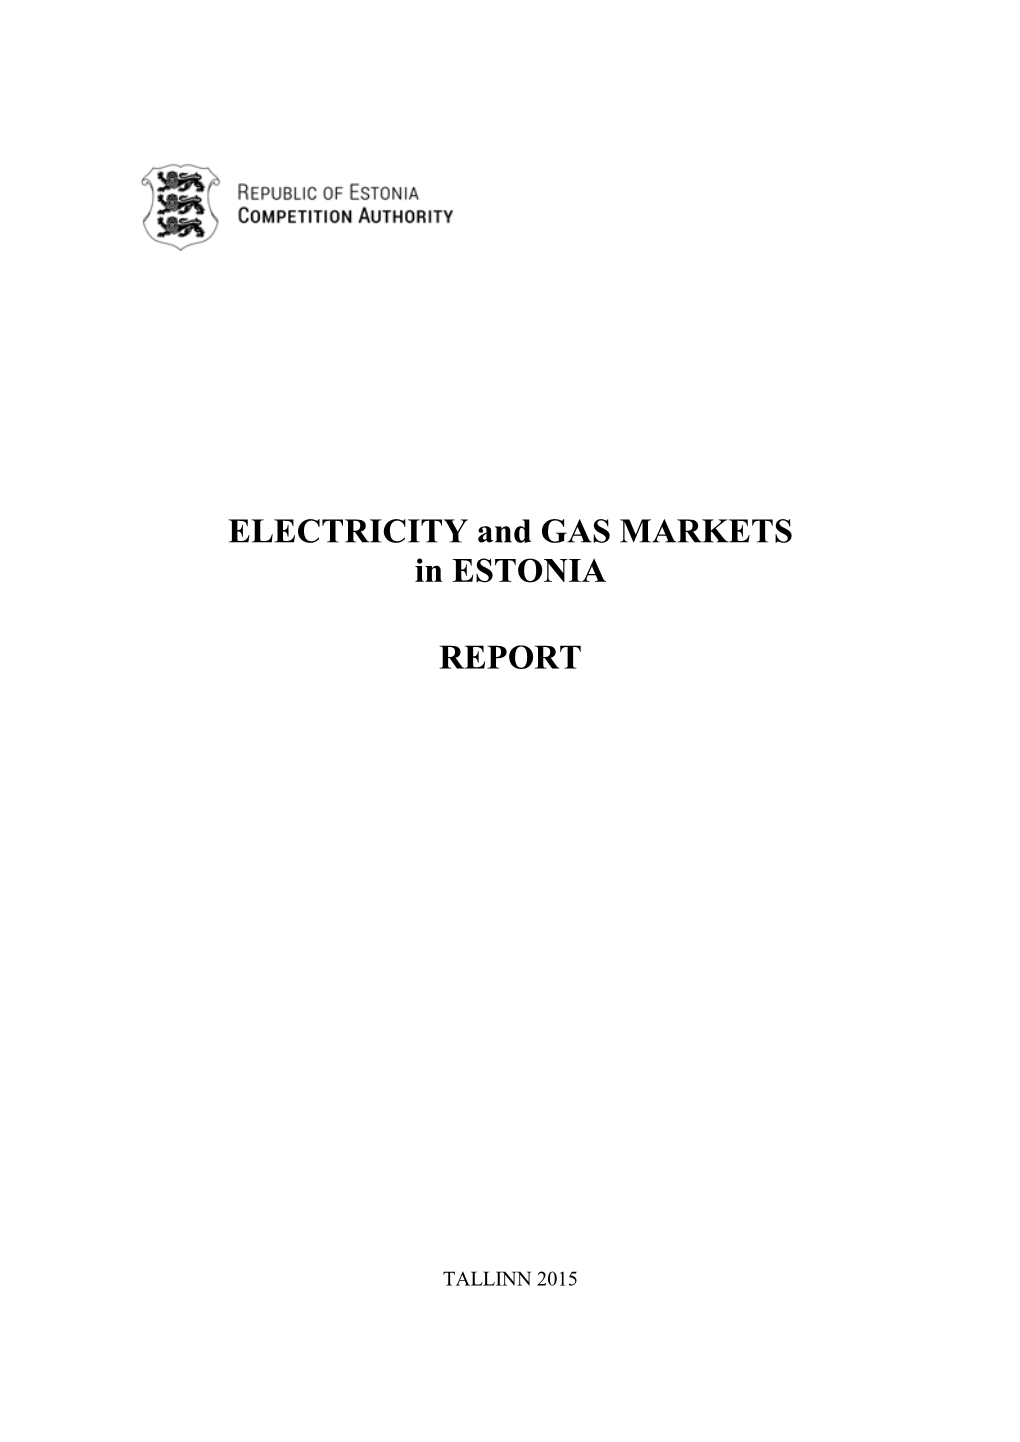 ELECTRICITY and GAS MARKETS in ESTONIA REPORT